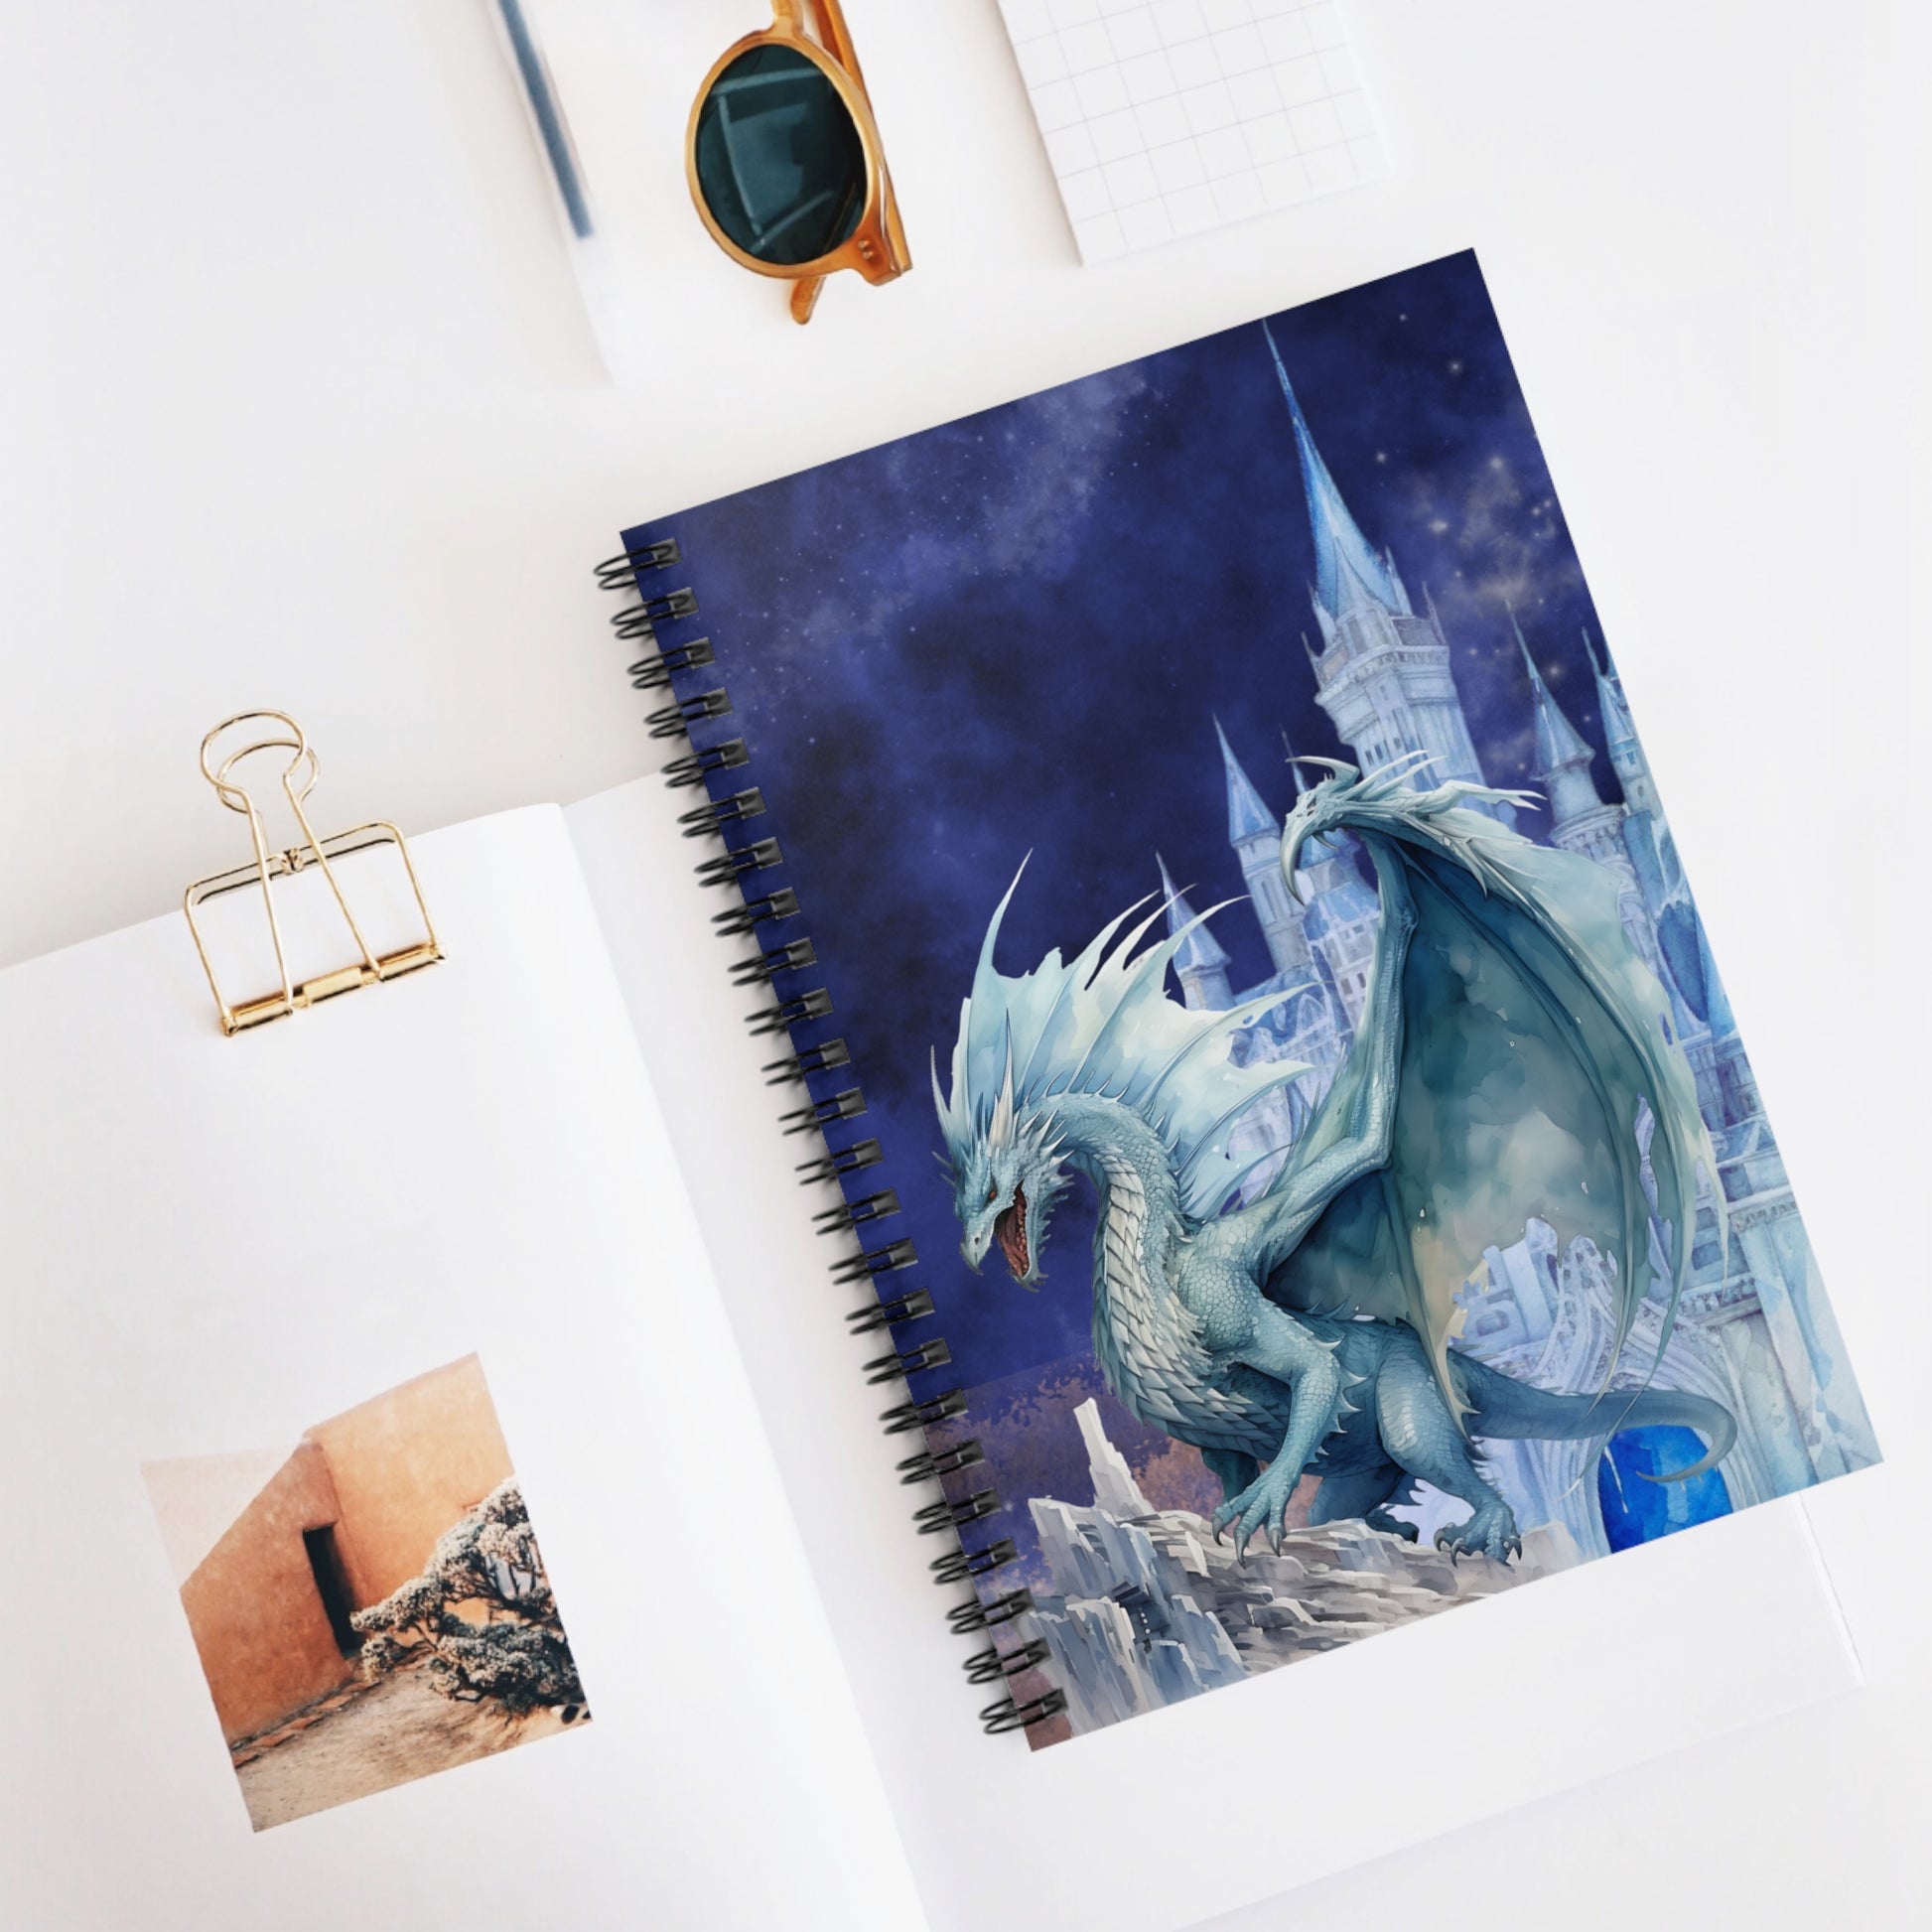 Castle Defense: Spiral Notebook - Log Books - Journals - Diaries - and More Custom Printed by TheGlassyLass